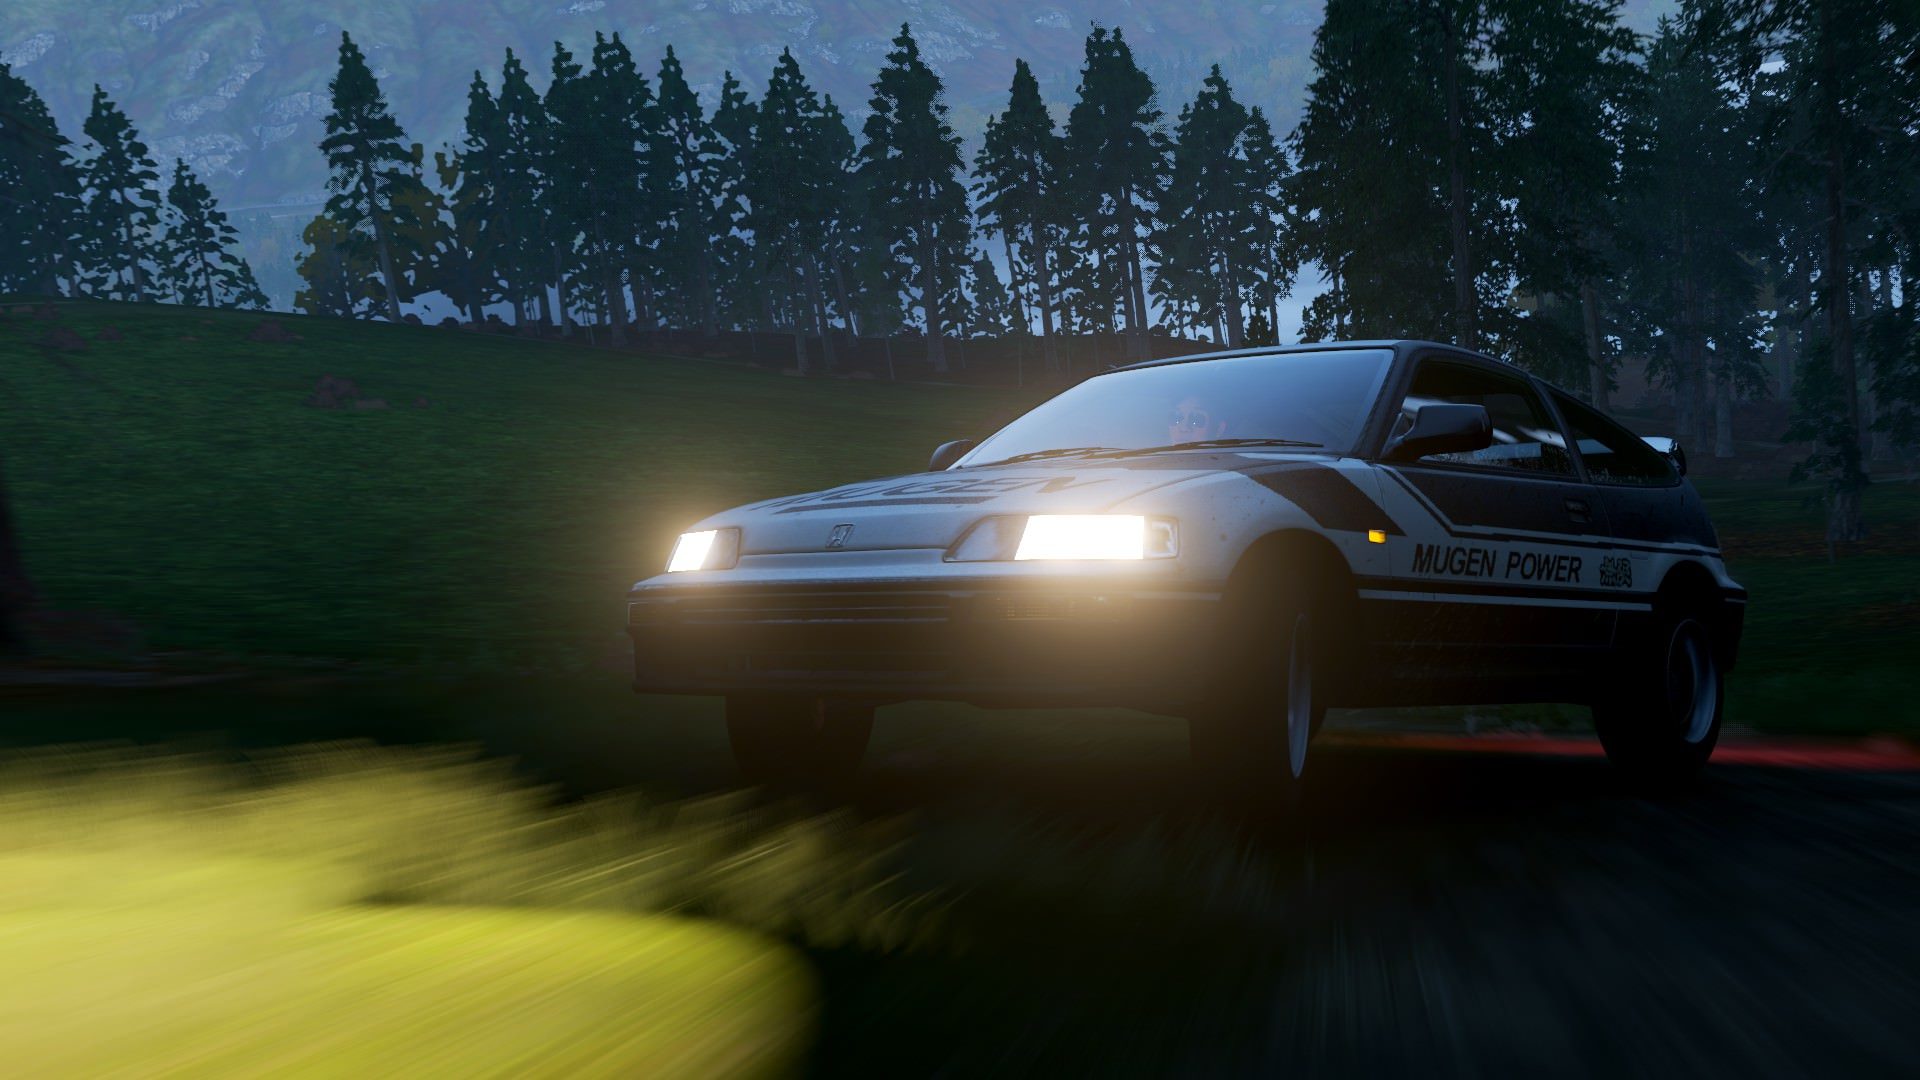 Off roading the CRX